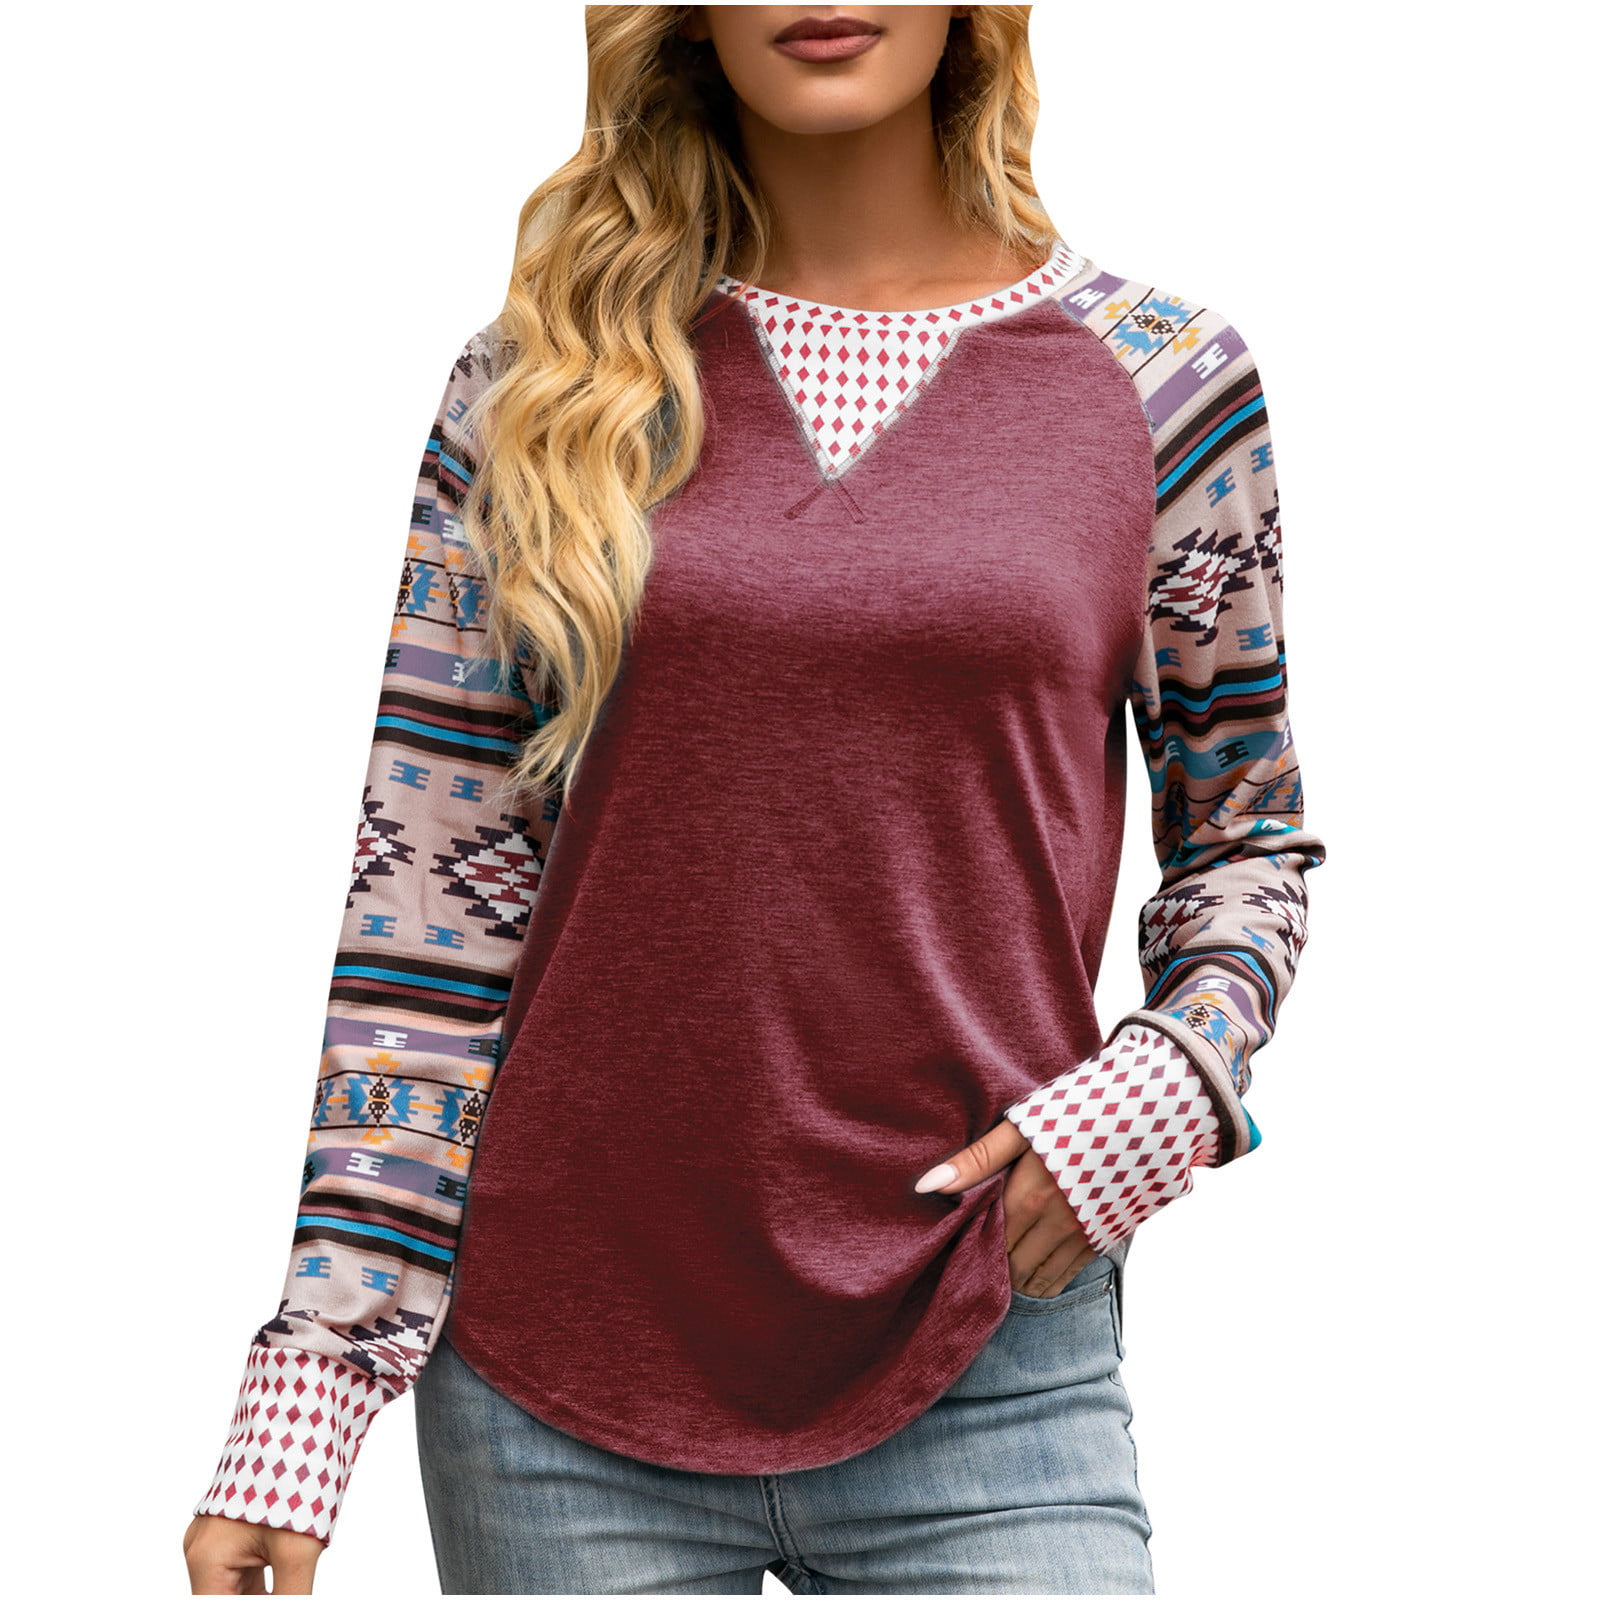 Leopard Print Color-Blocking V-Neck Sweaters Autumn and Winter Bottoming Shirts Comfortable Long-Sleeved Tops Ladies Casual Tops Loose-Fitting Shirts Pullover Sweatshirts 